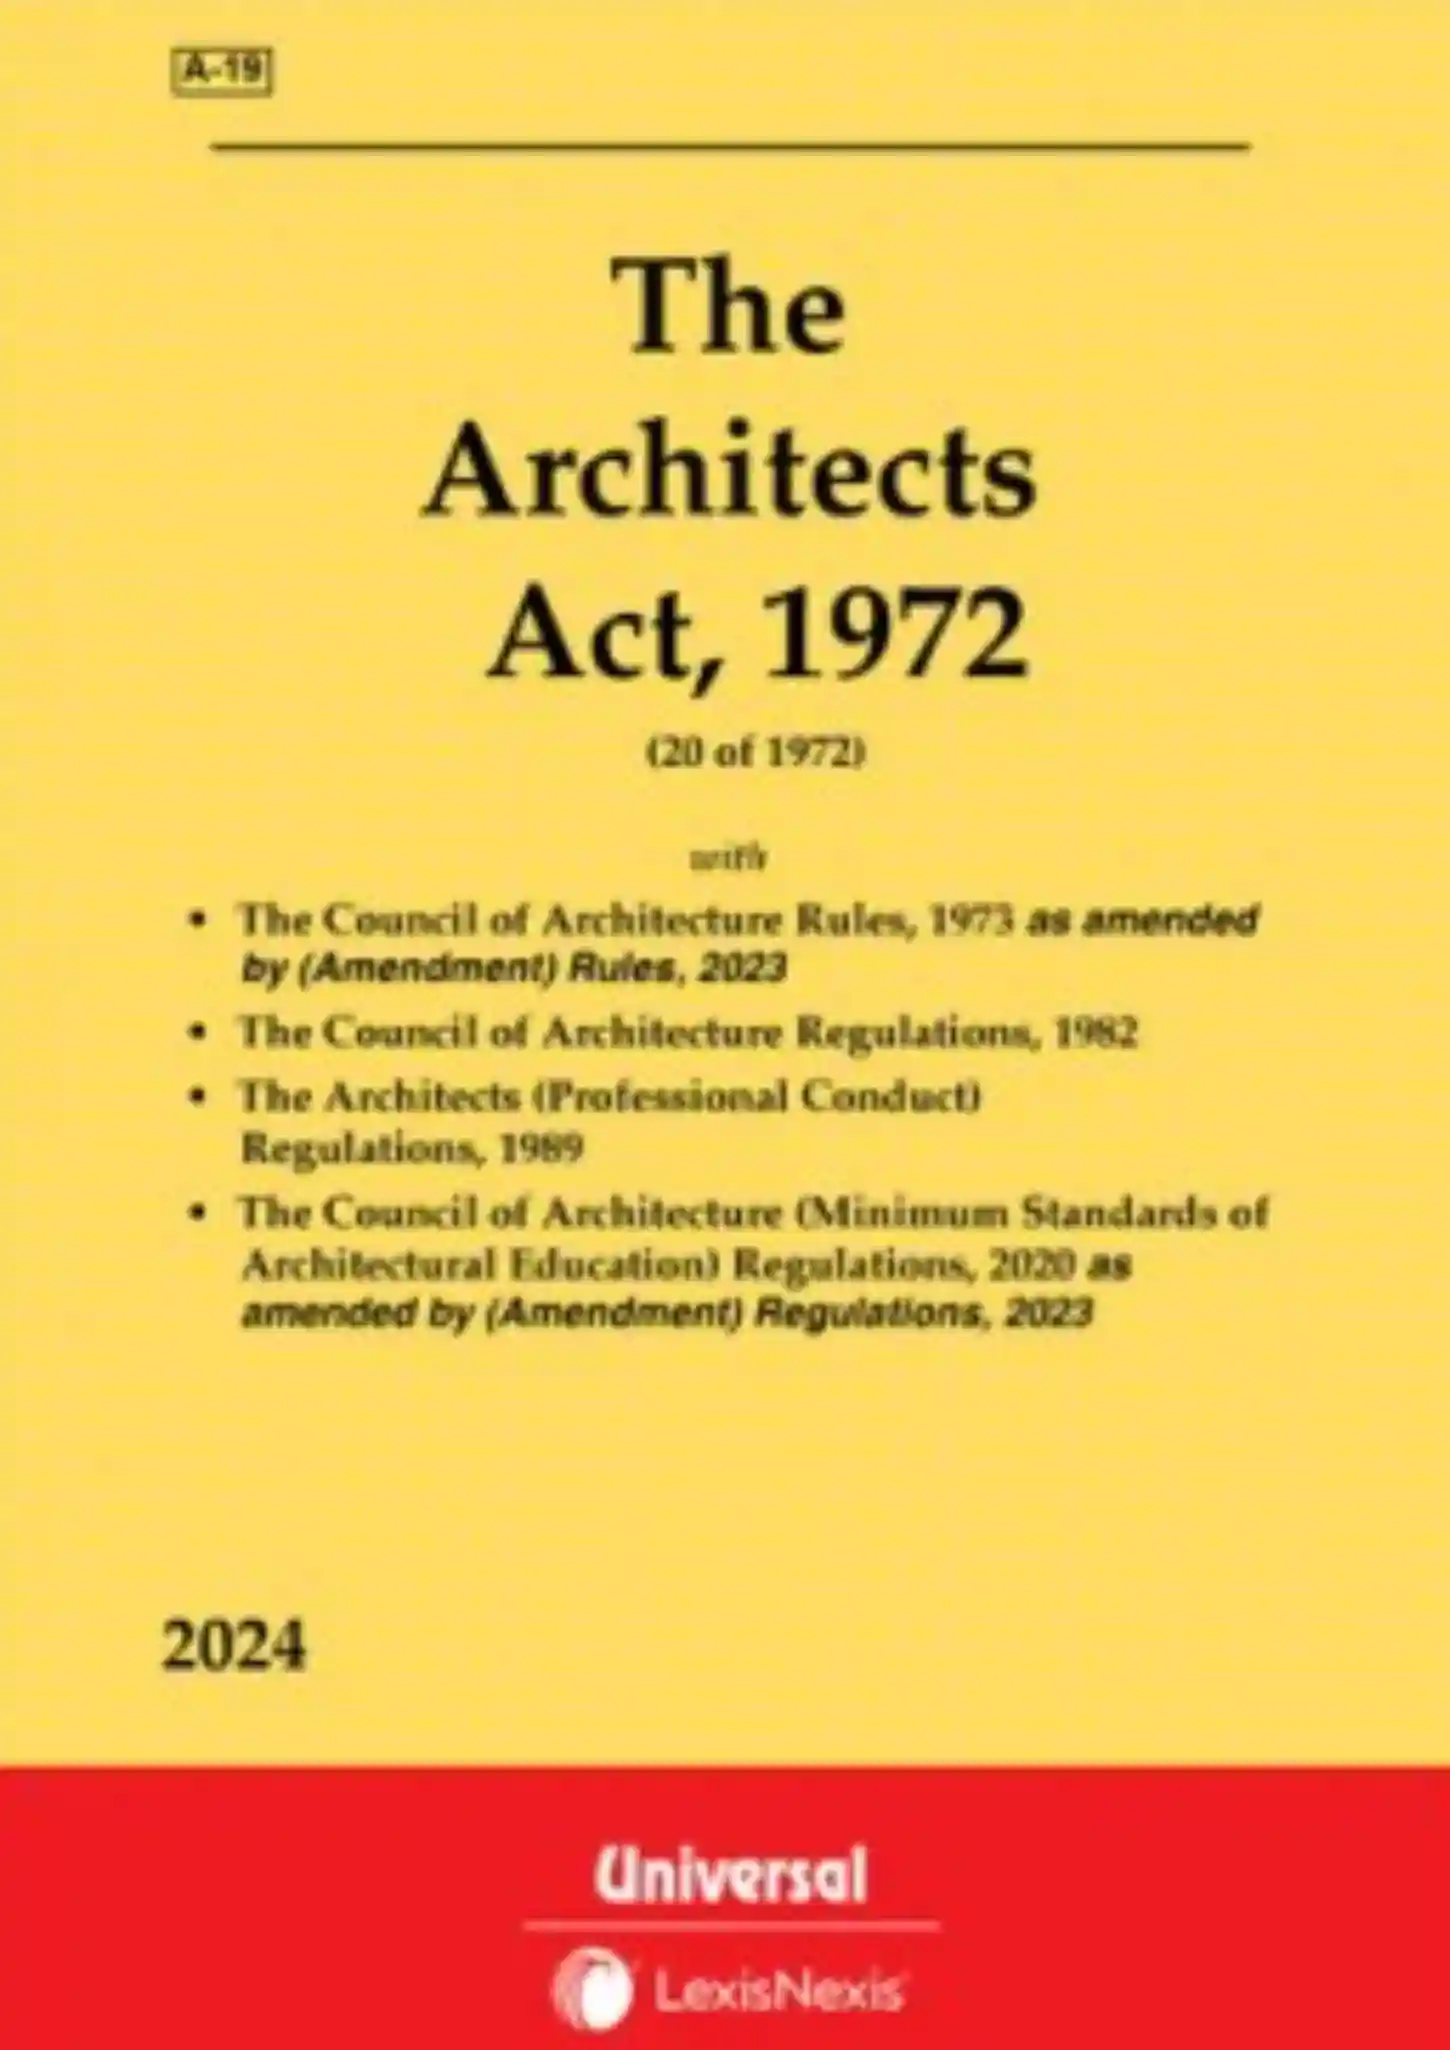 Architects Act, 1972 along with Rules and Regulations